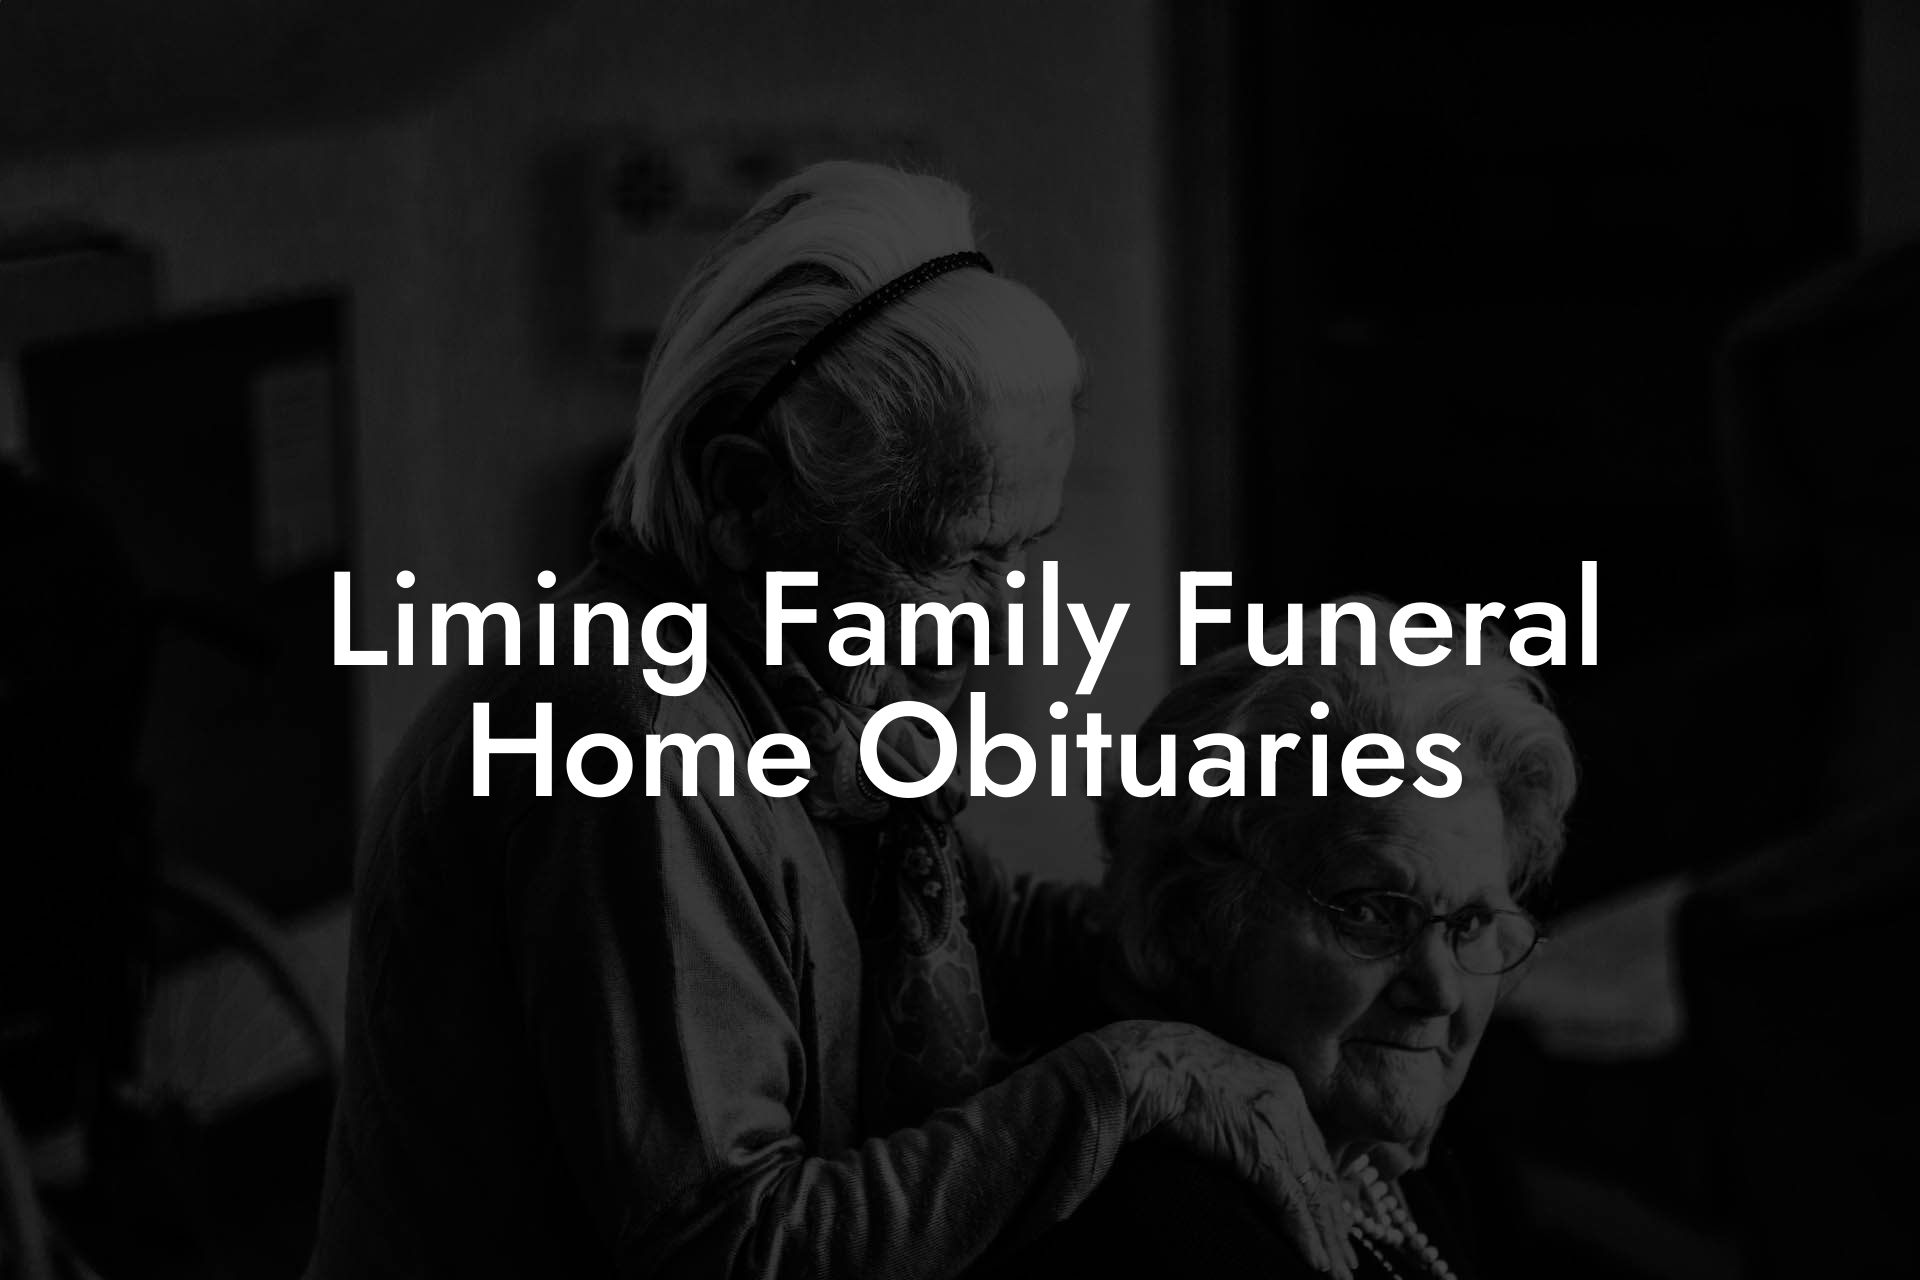 Liming Family Funeral Home Obituaries